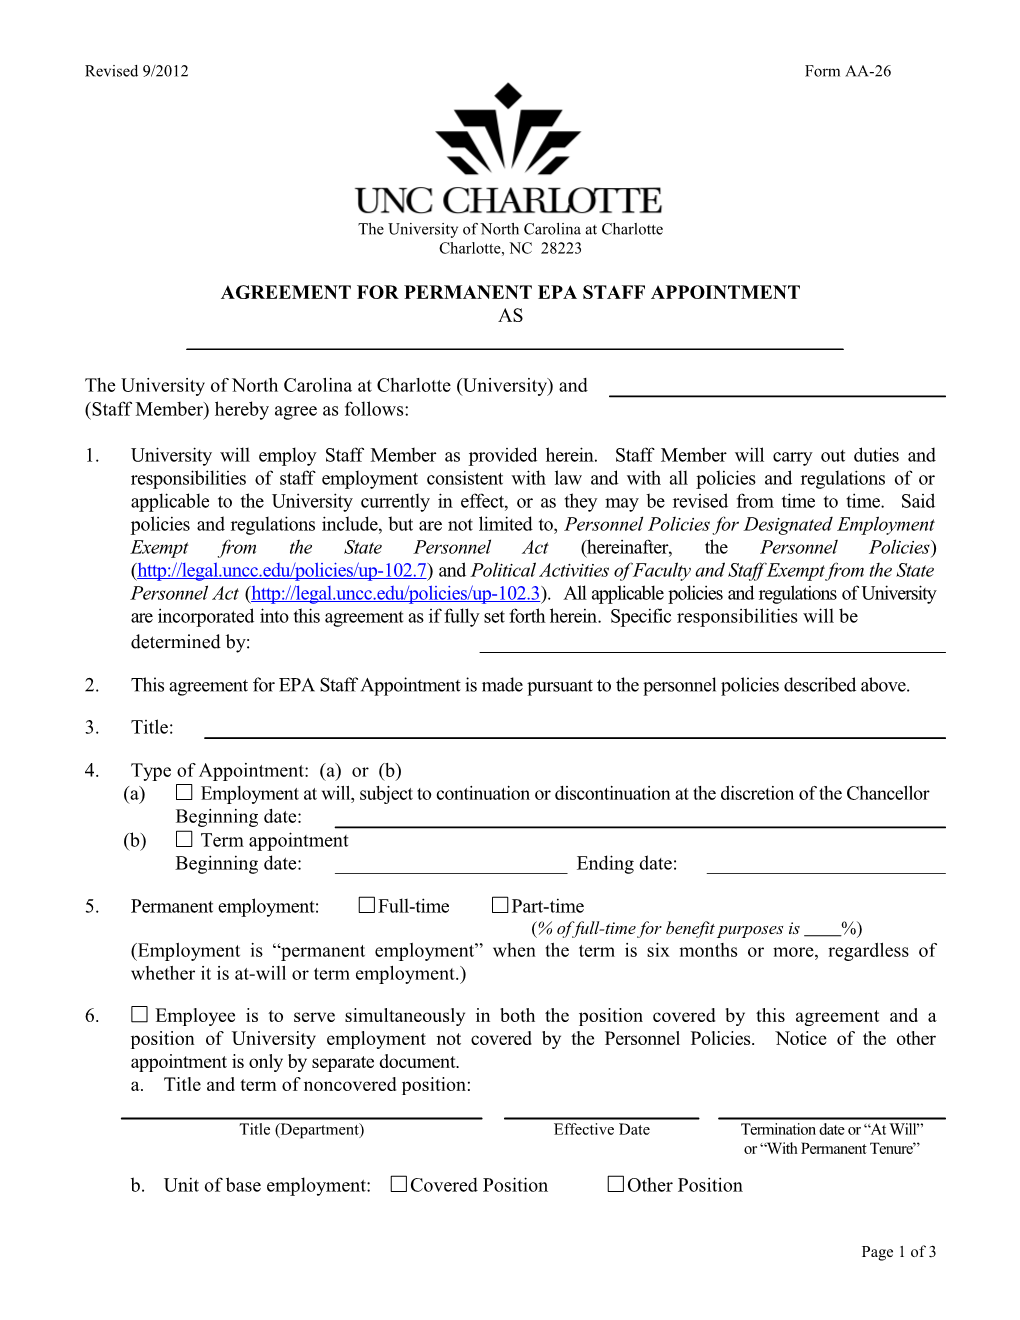 Agreement for Permanenet EPA Staff Appointment